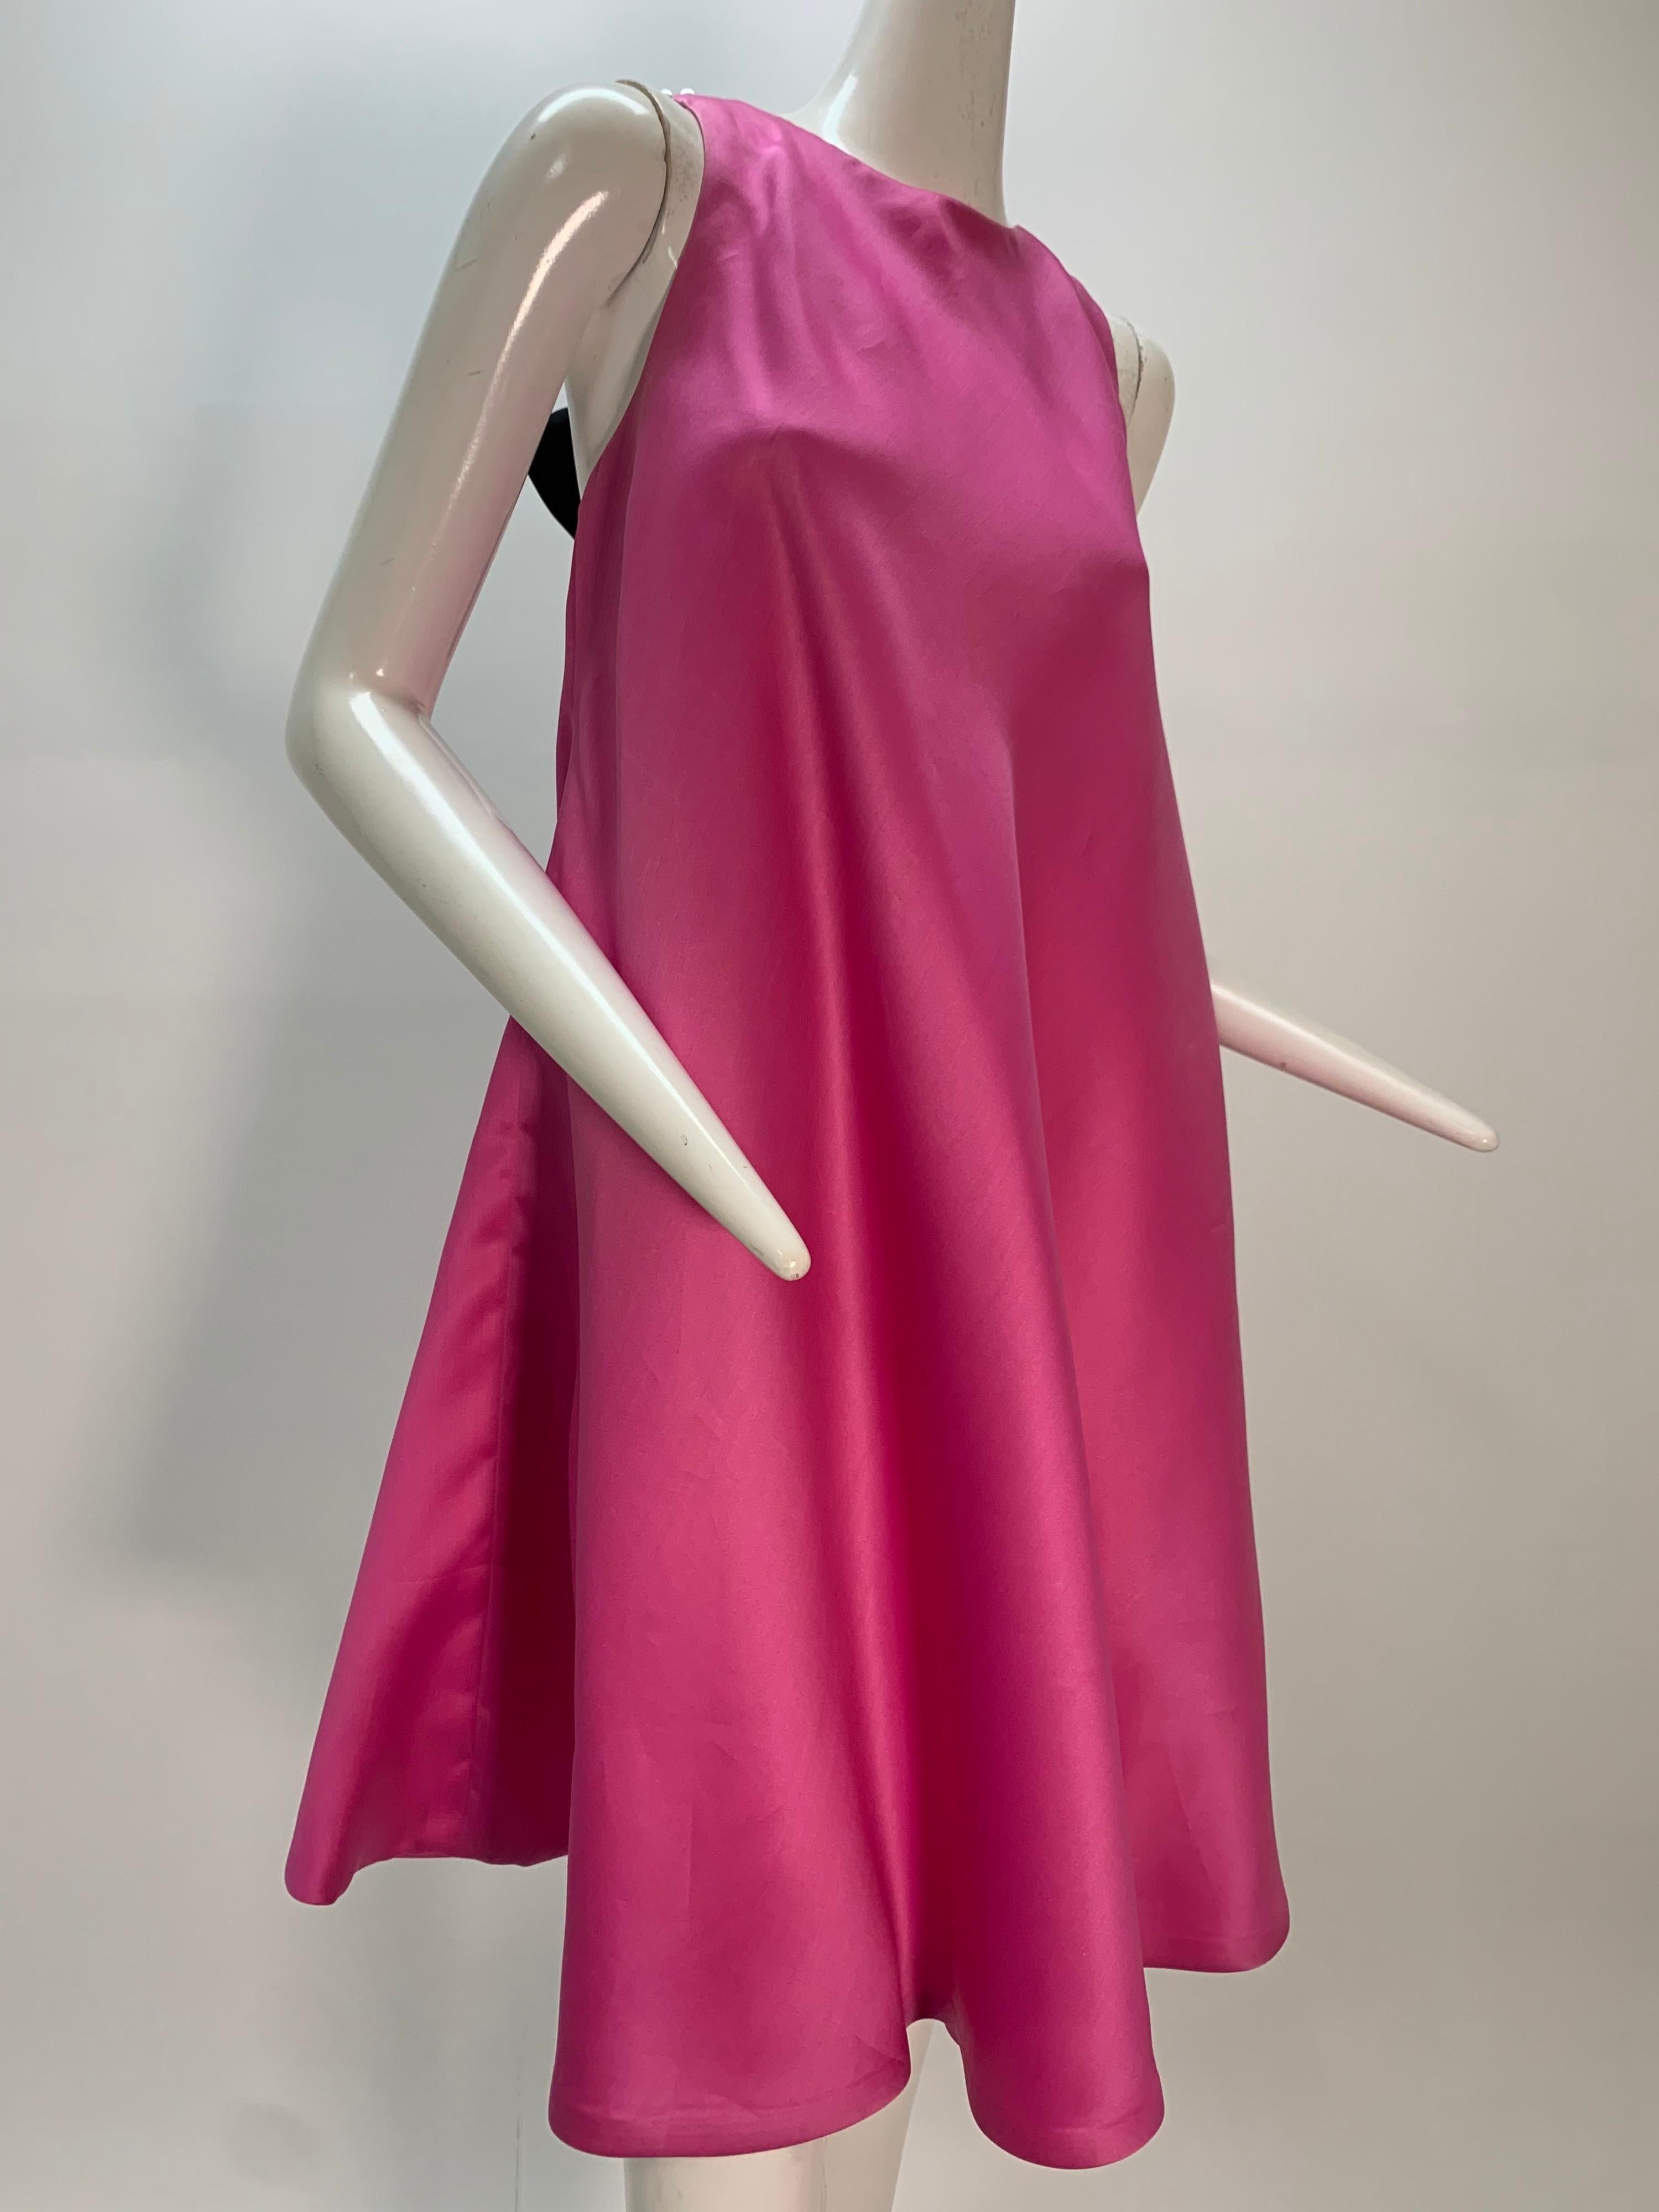 1980s Bill Blass bias-cut pink silk organza trapeze mini dress with chunky pearl strands and silk satin bow closure at back:  Fabulous! Fully lined. Zipper at back.
Fits up to a size US 6